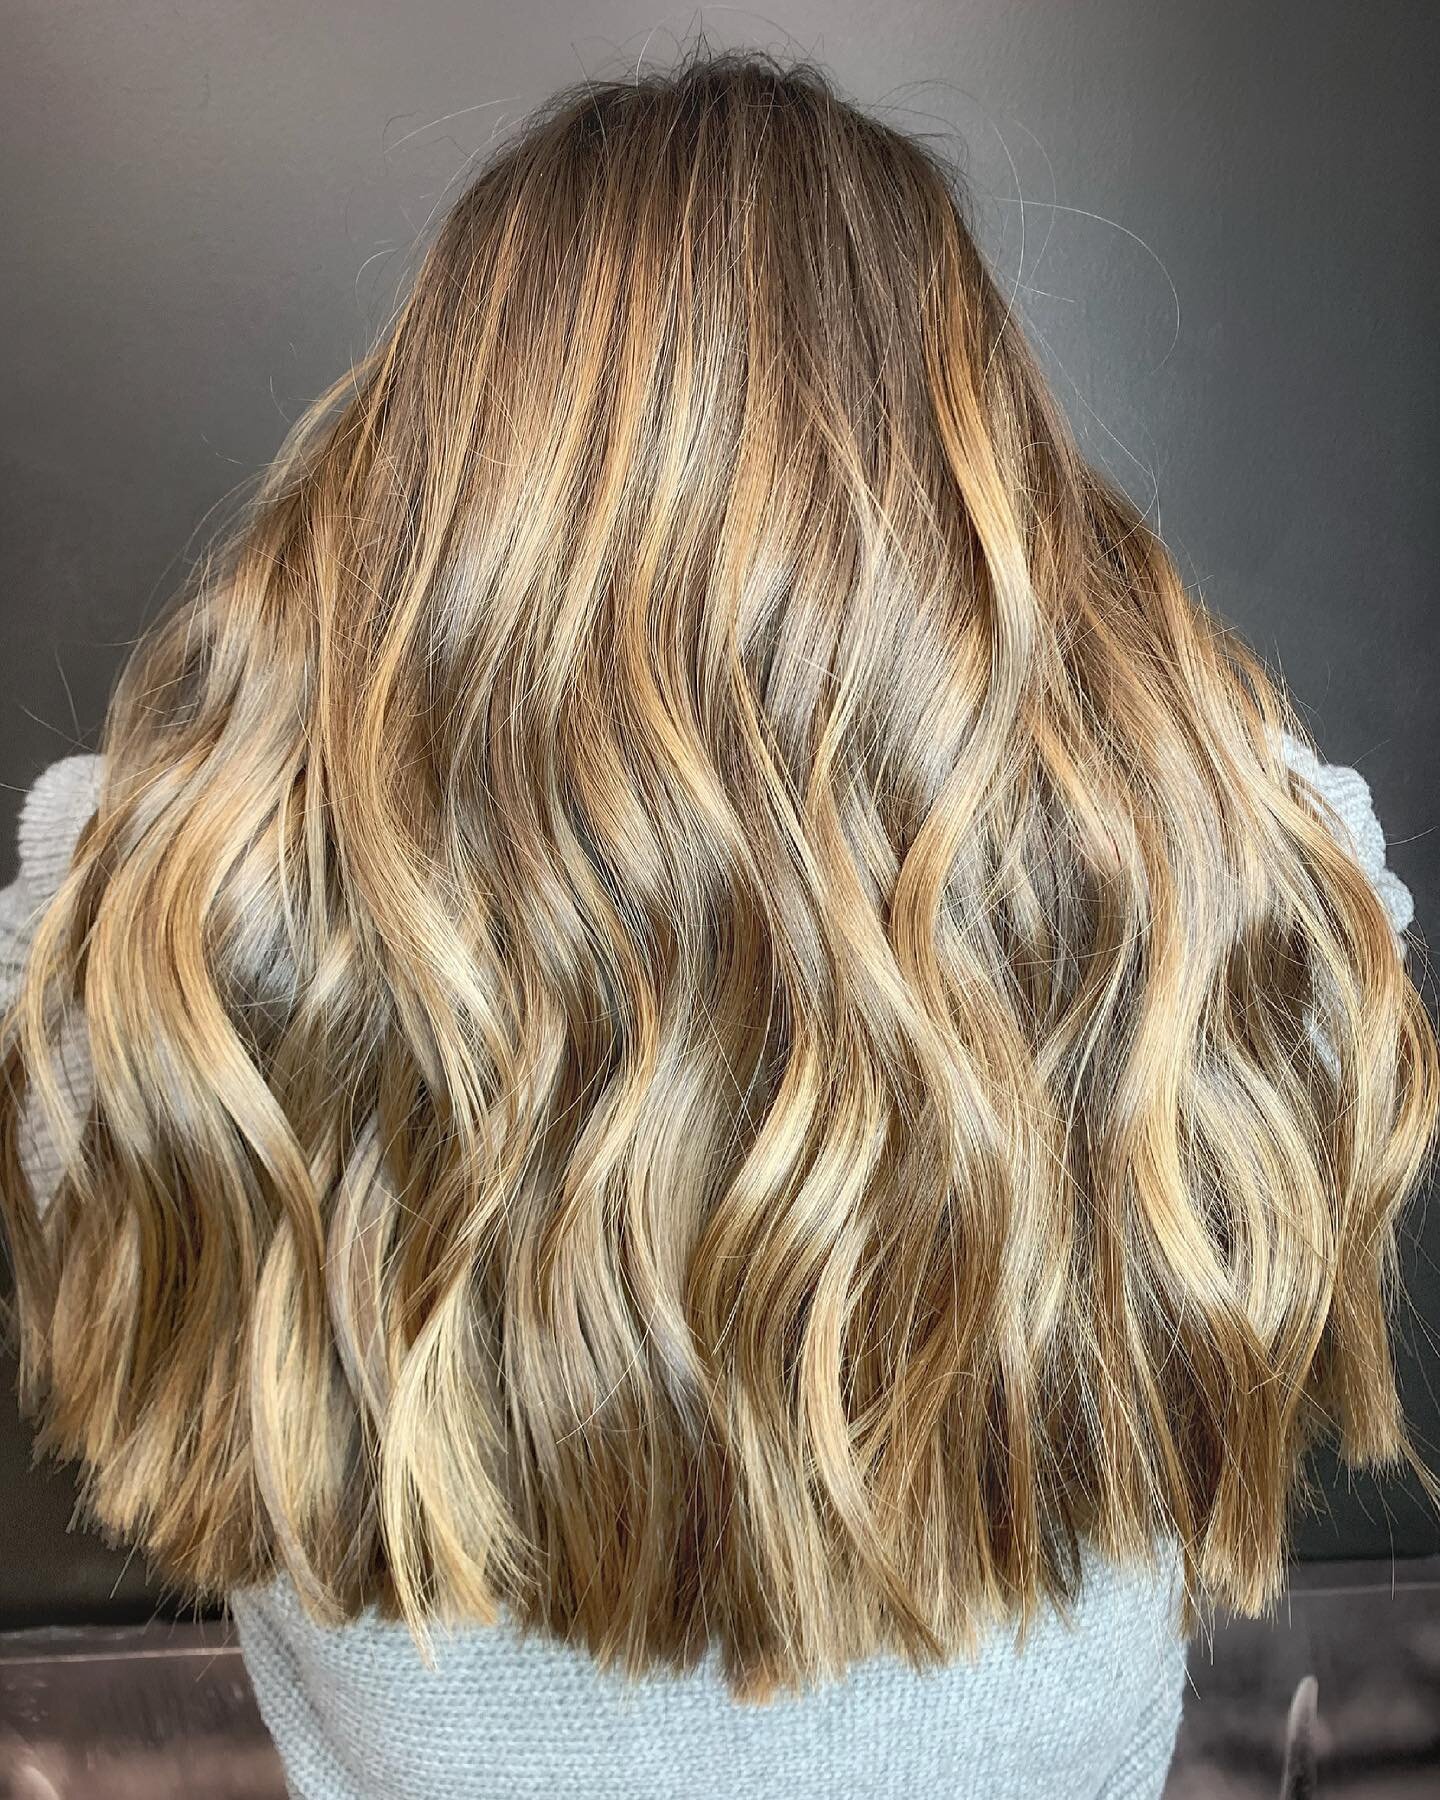 Caramel drizzle kind of day! Swipe ➡️ to see before

For her first time seeing me our goal was dimension. We went in with a partial, hand painted balayage to leave depth underneath. Toned with a middle ground 7 series from redken shades, followed wit